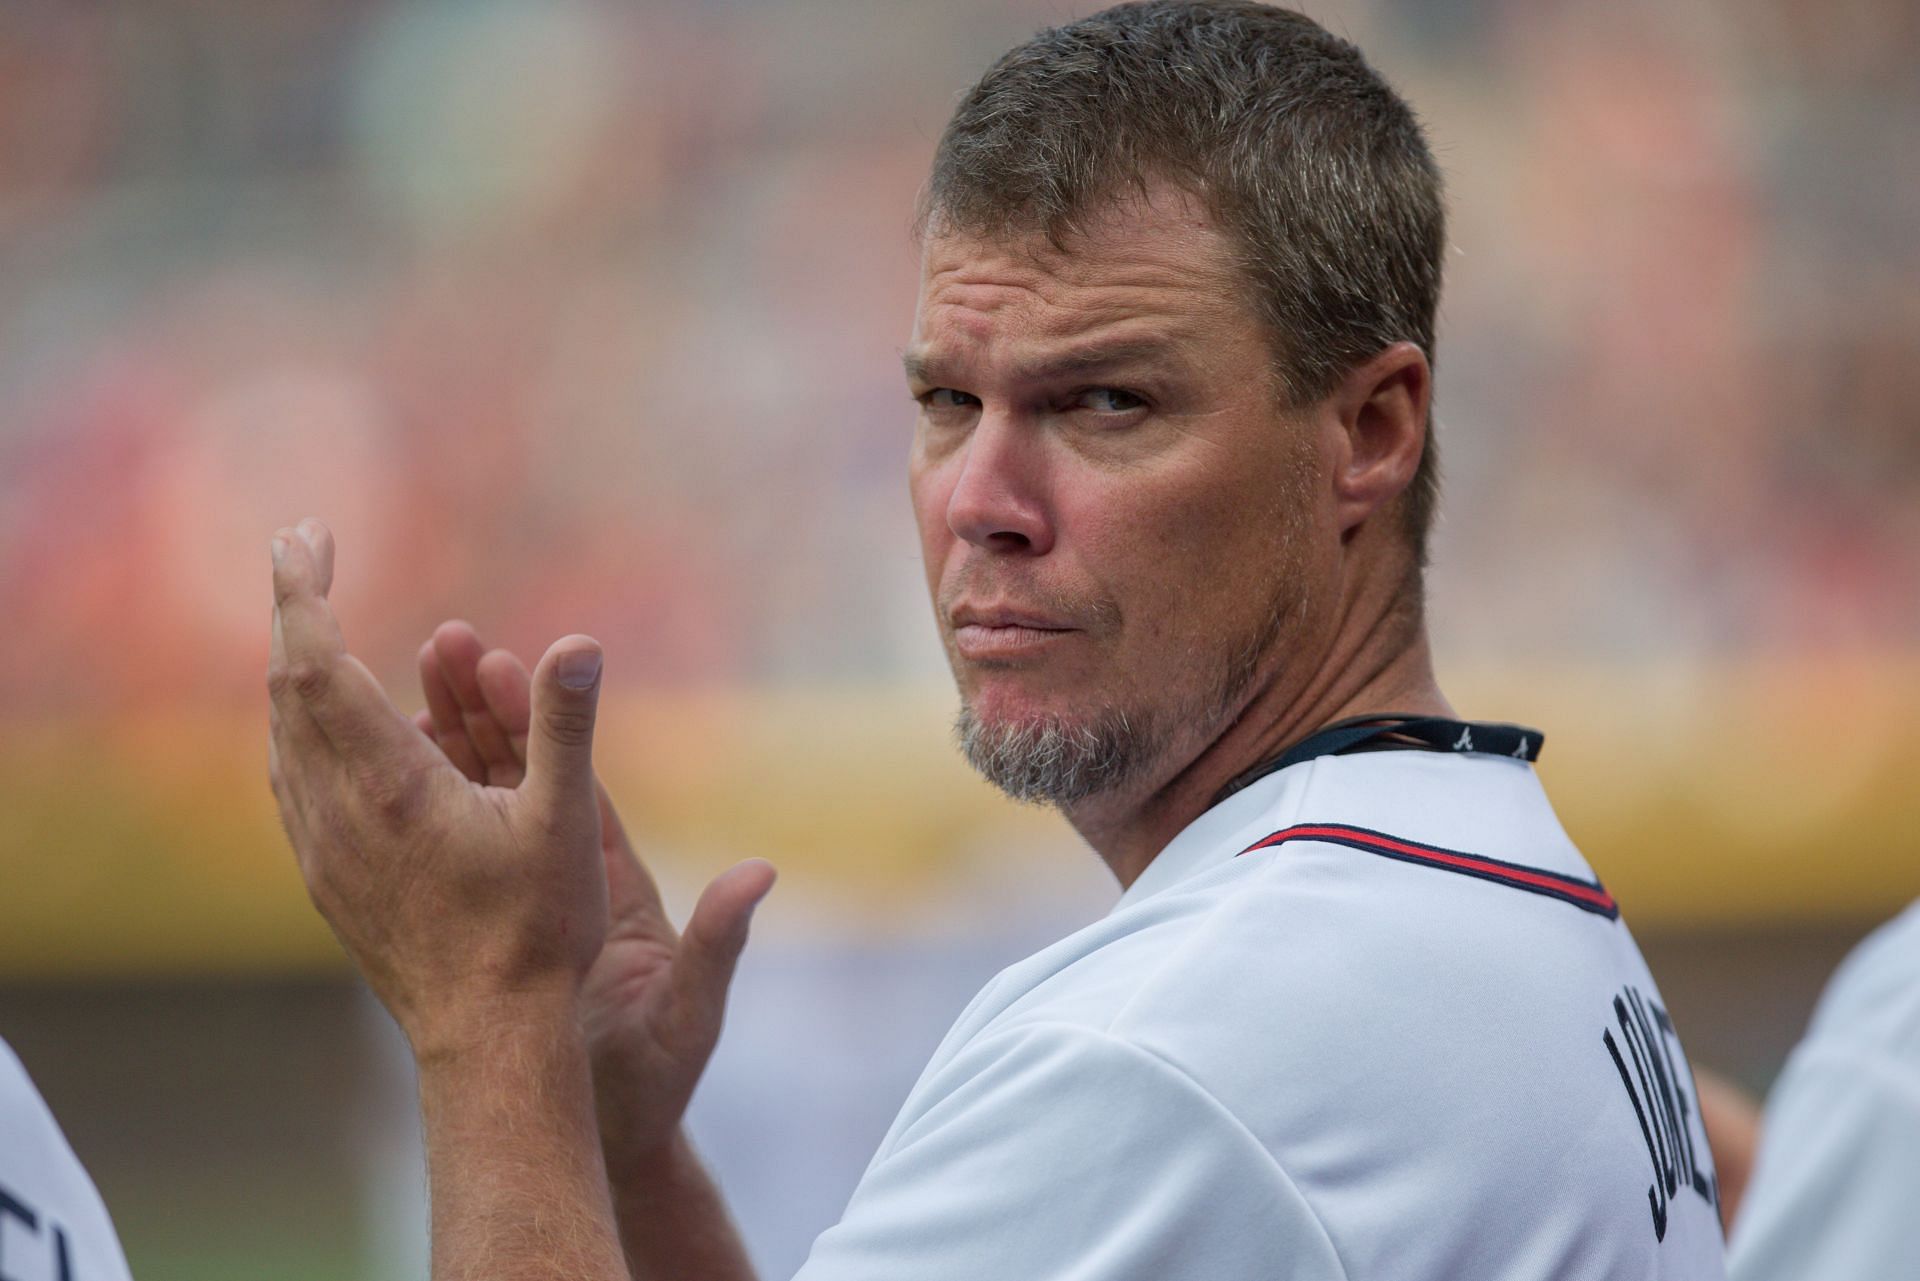 When former Atlanta Braves star Chipper Jones contemplated his rocky past  and wrecked marriages